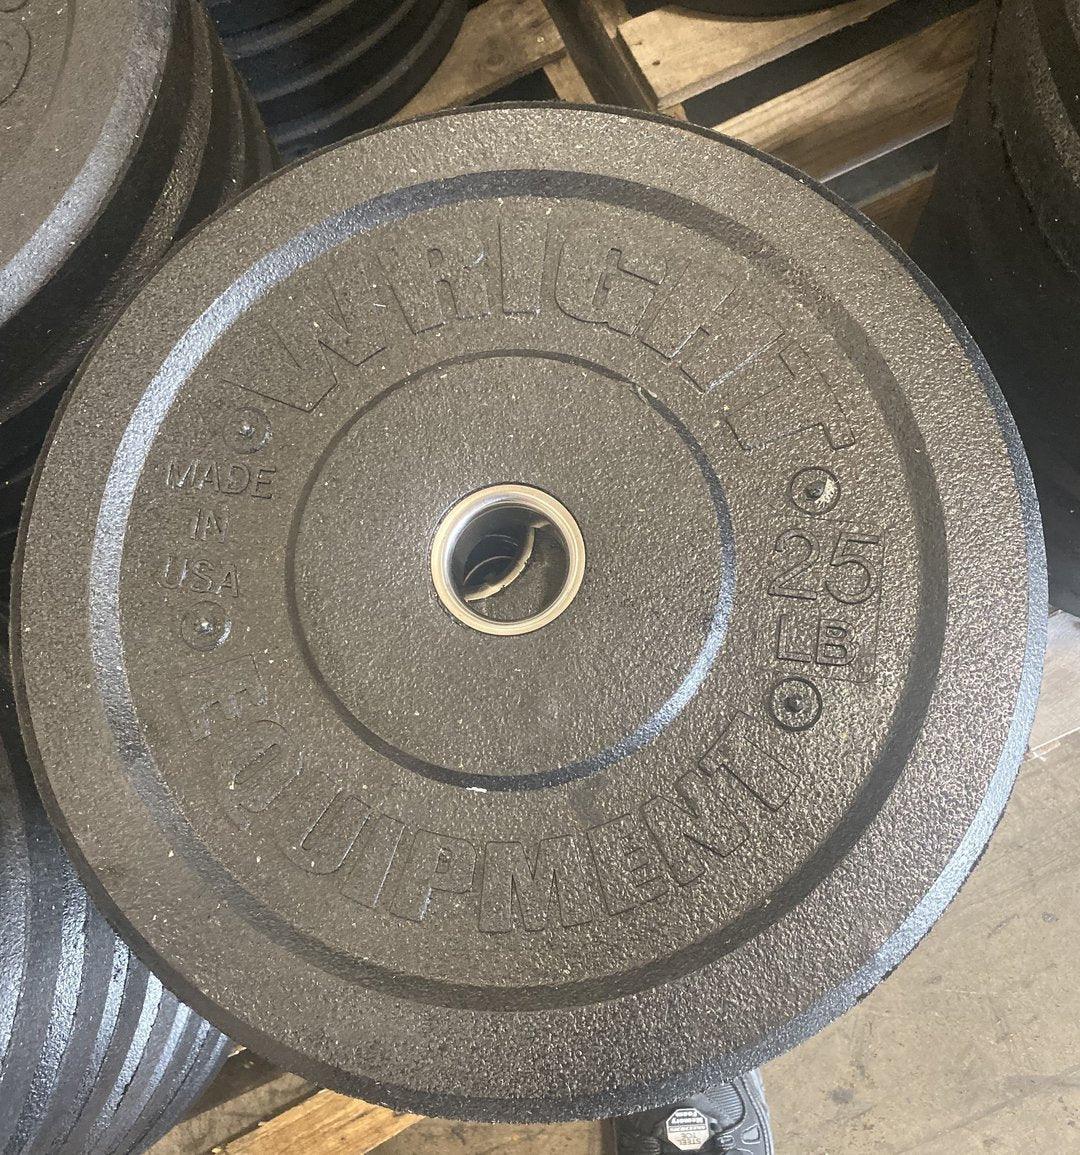 Show Me Weights, Blemished Bumpers - Price Is Per Pair